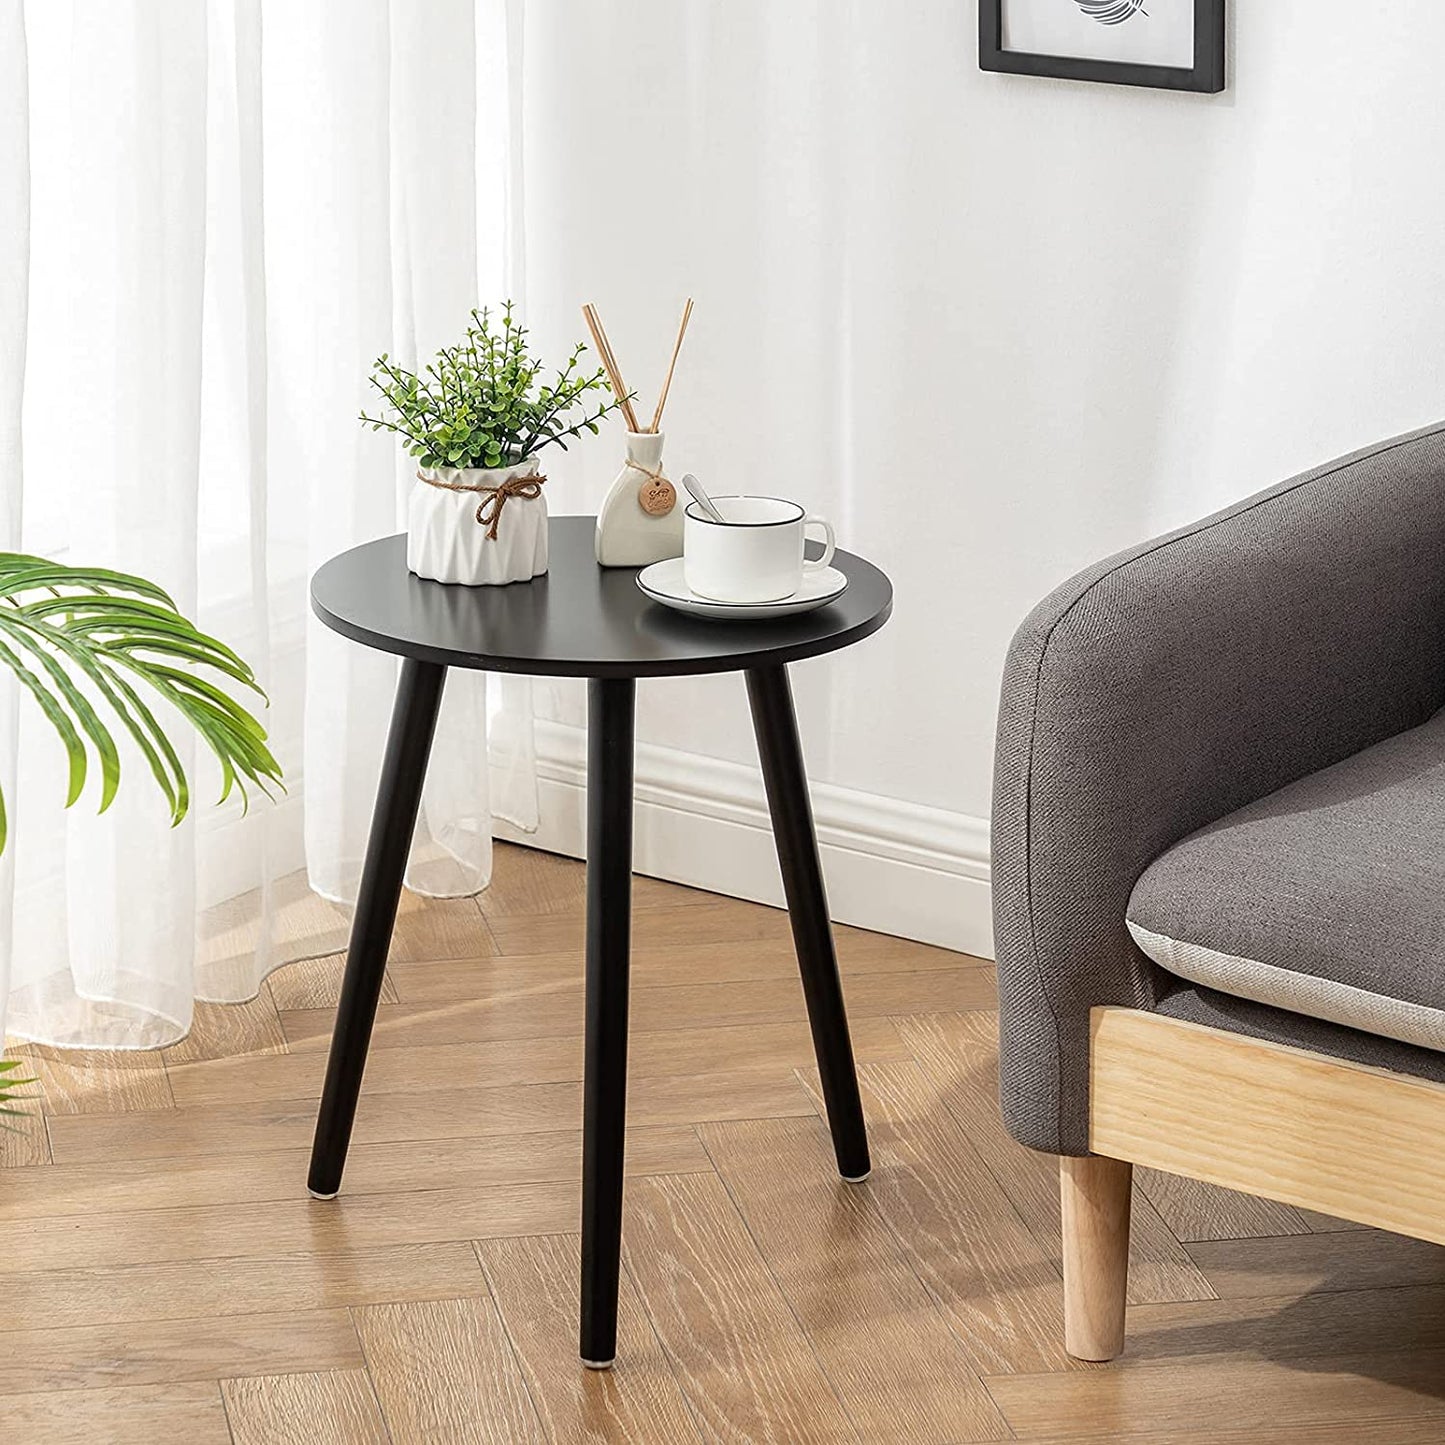 Side Table : Round Side Table, Black Nightstand End Table for Small Spaces